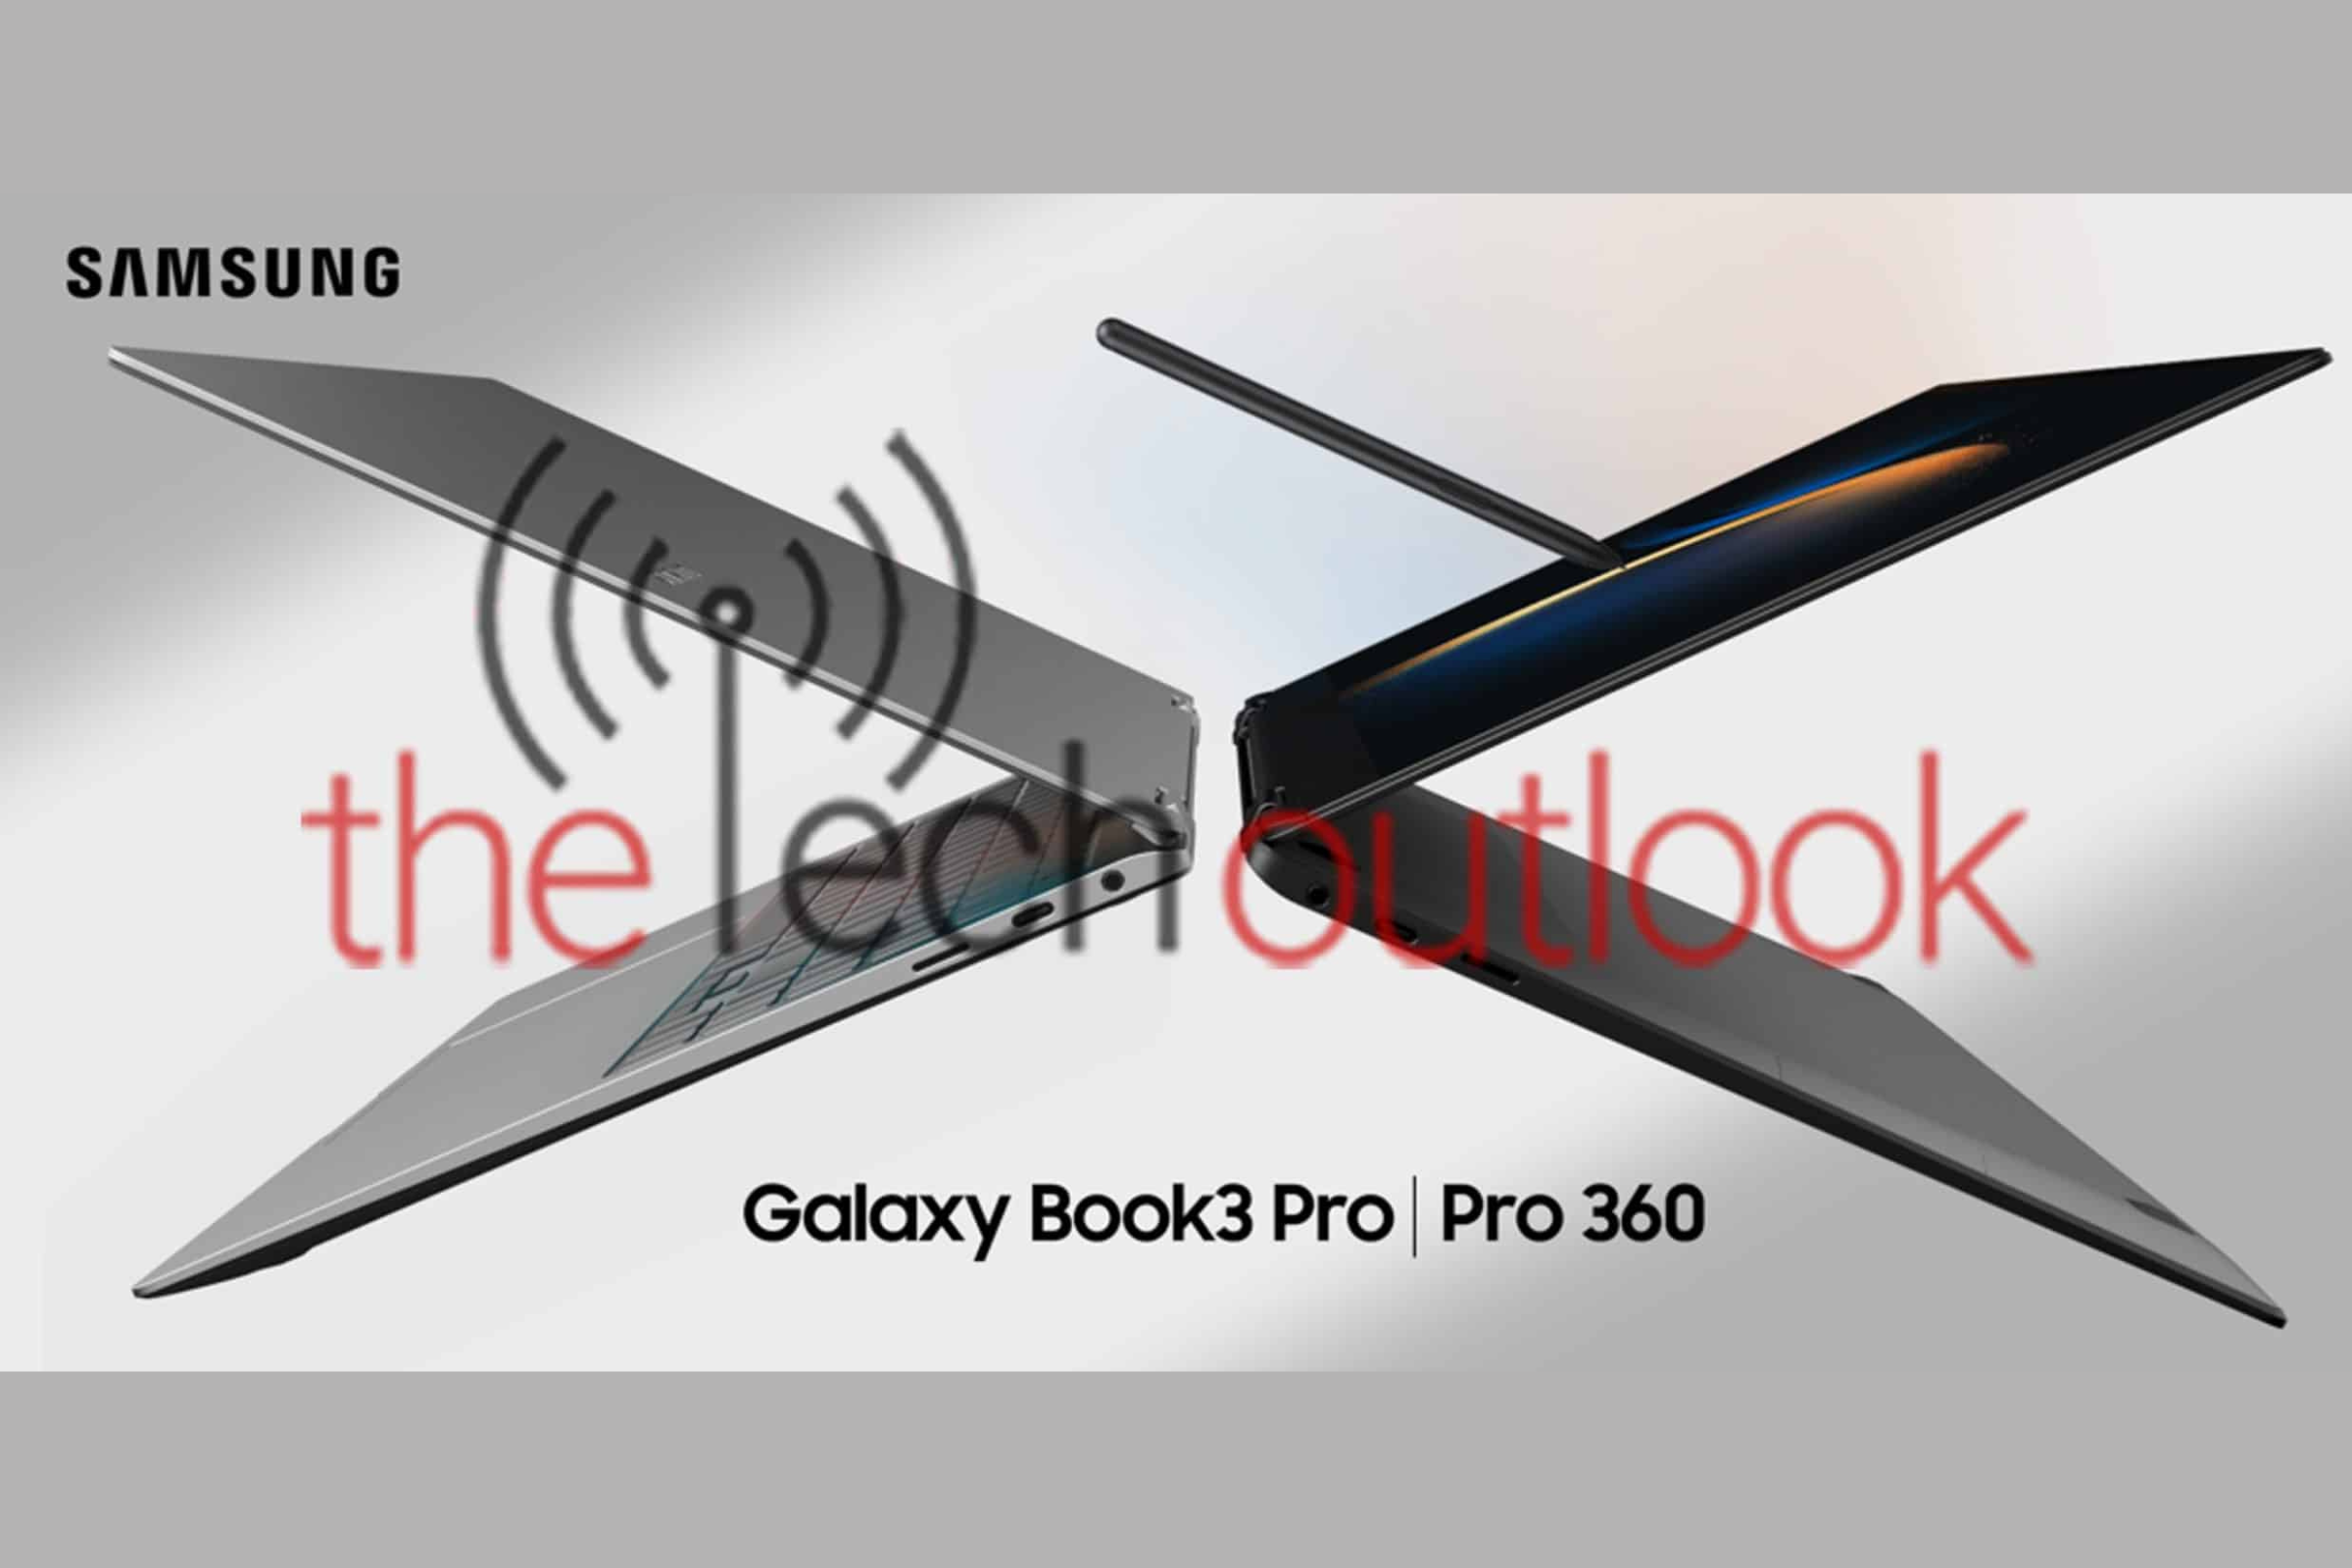 New Samsung Galaxy Book 3 leaks give us an early look at what’s to come